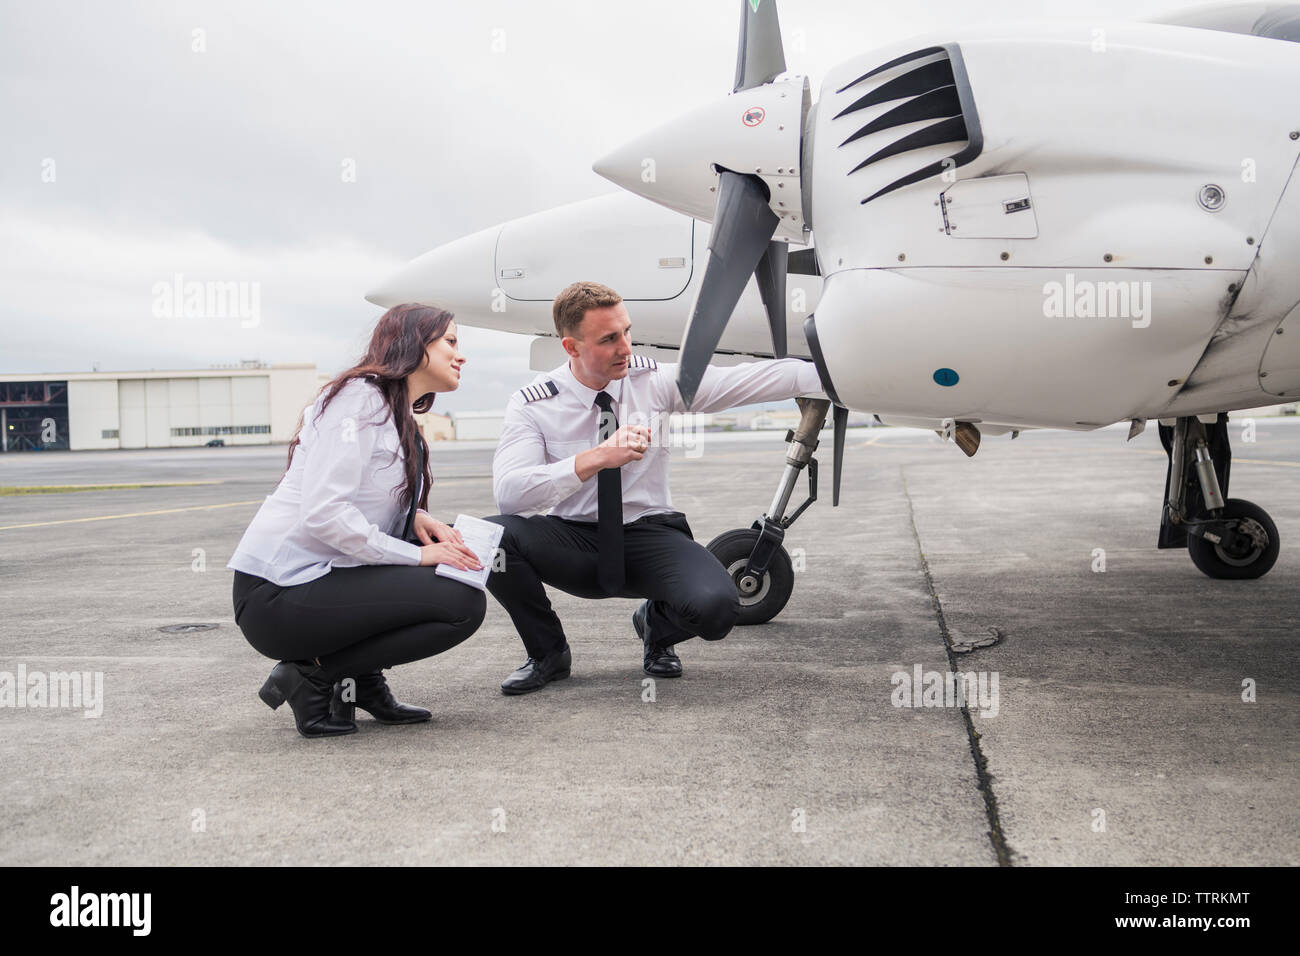 Engineer showing airplane parts to female trainee while crouching on airport runway against cloudy sky Stock Photo